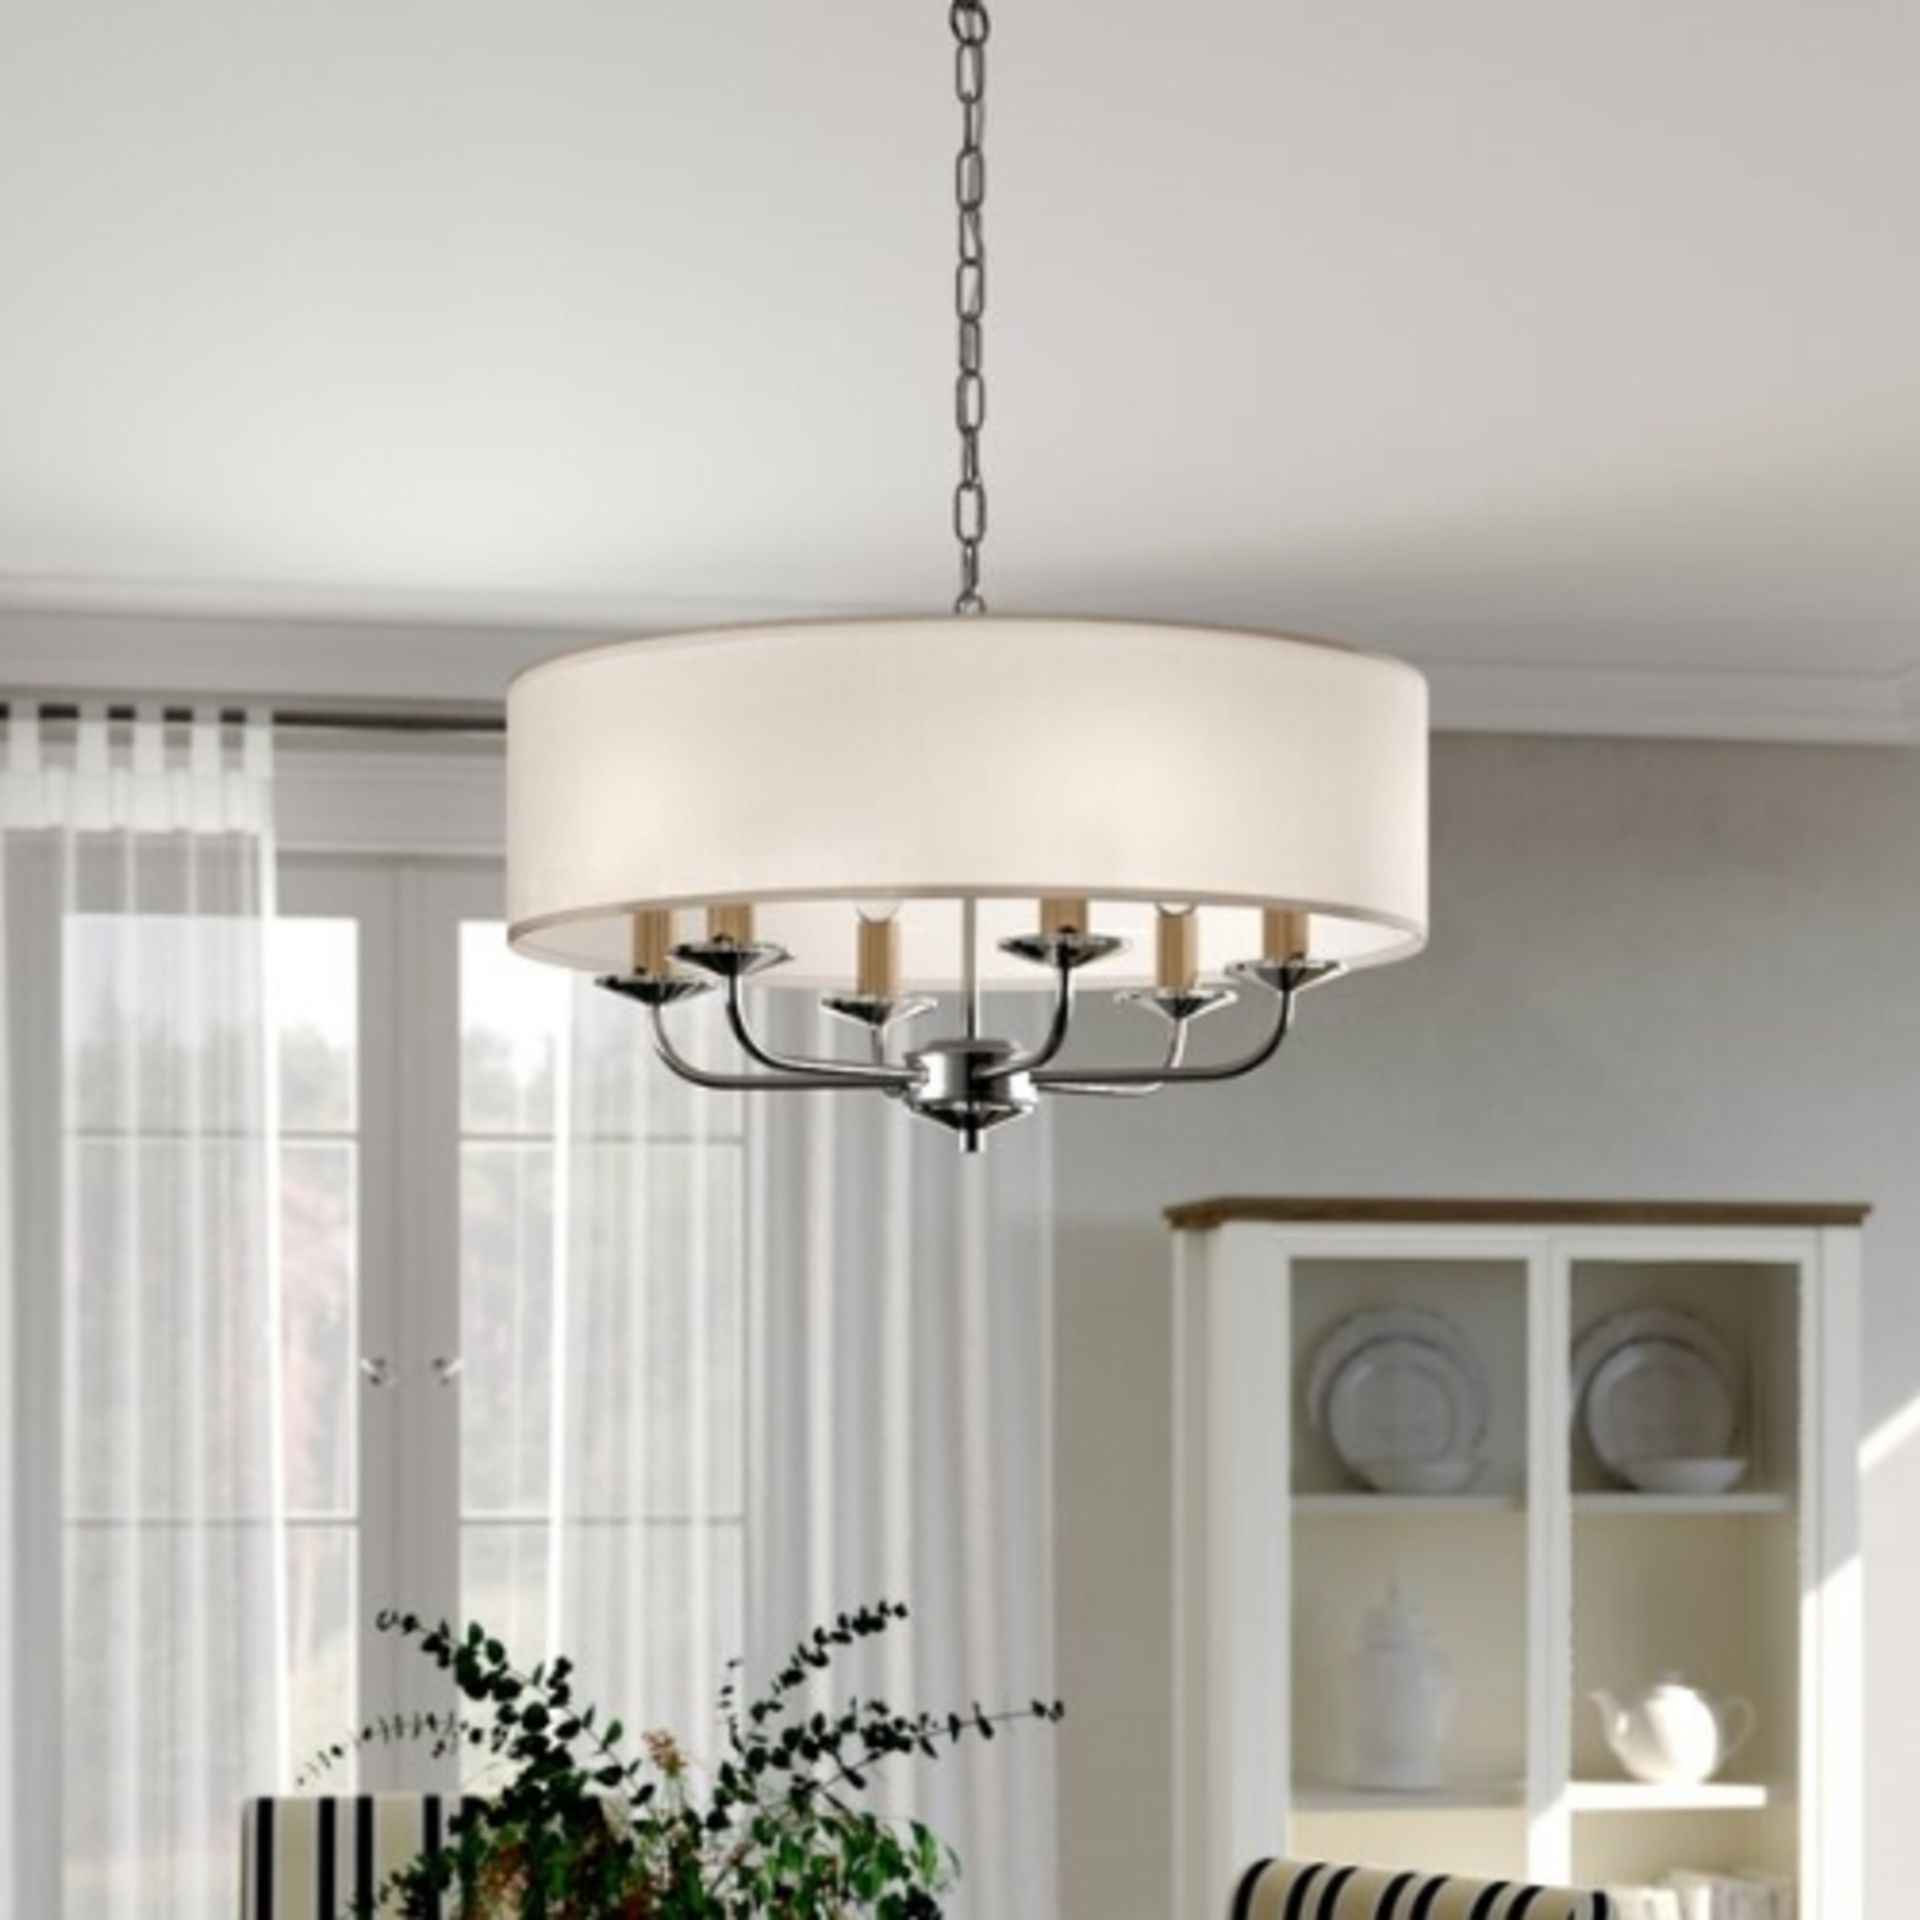 Foxworth 6-Light Drum Chandelier by Classic Living